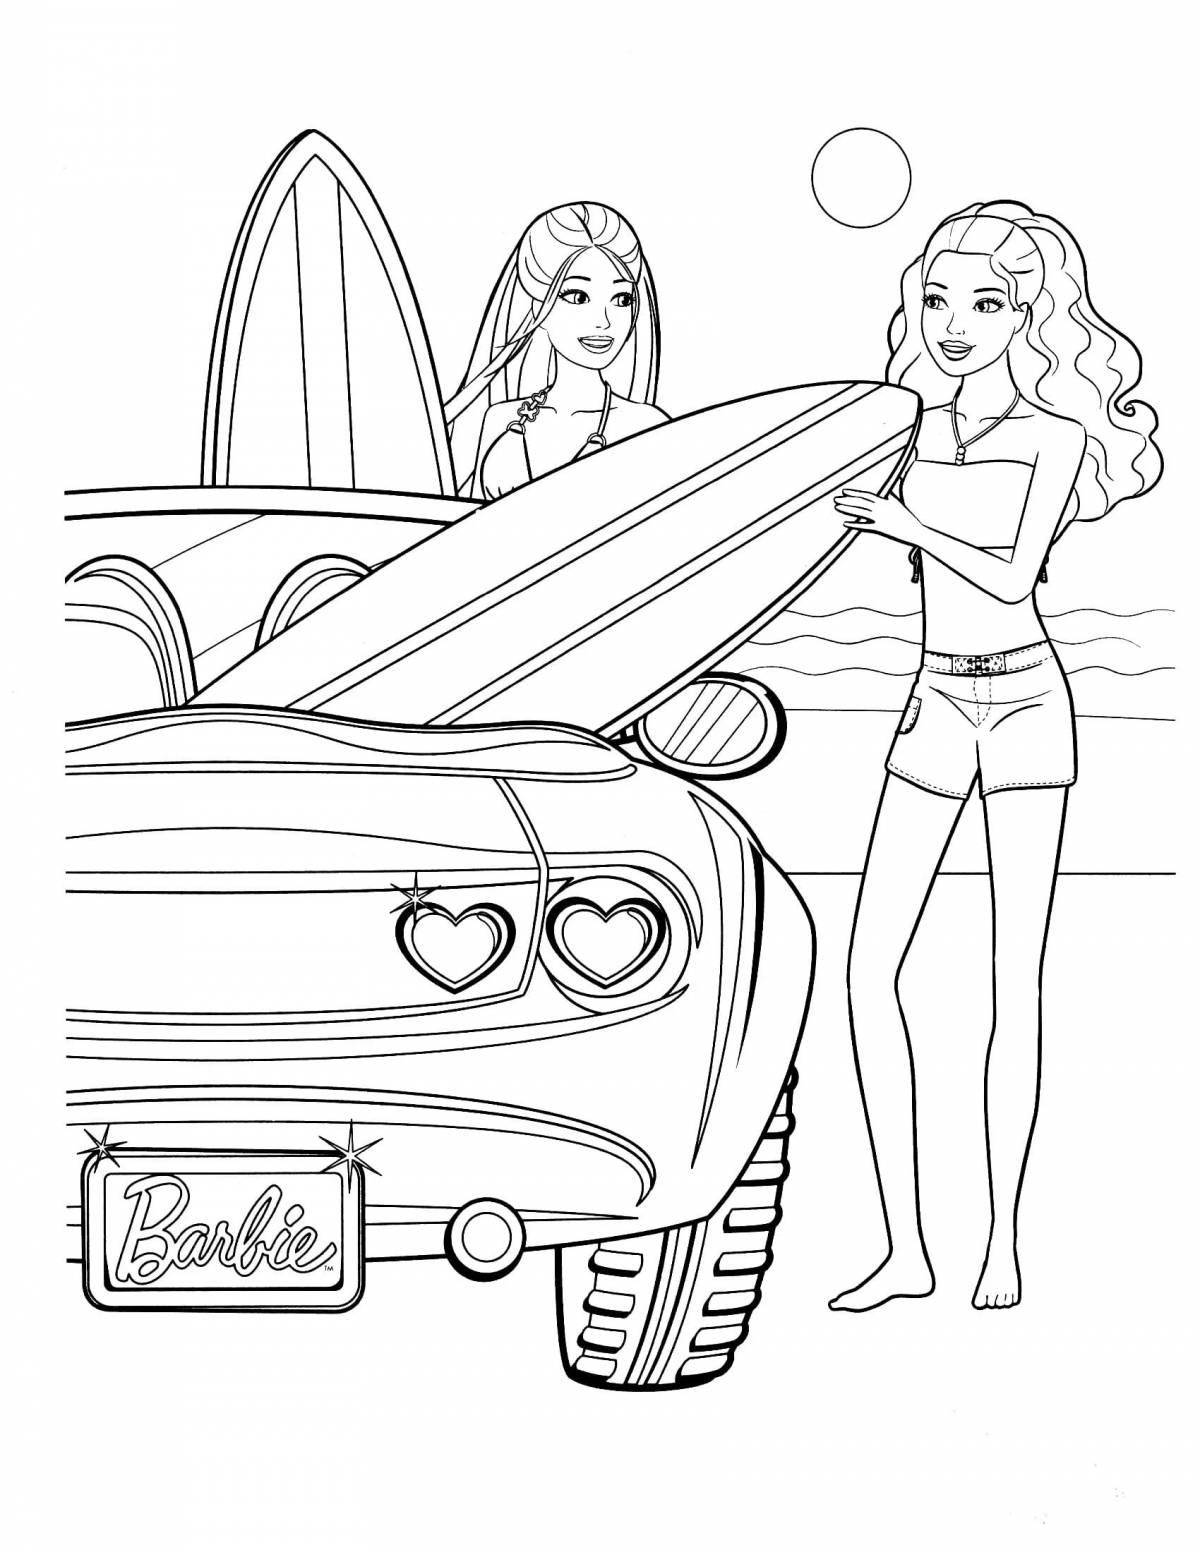 Cool car coloring for girls